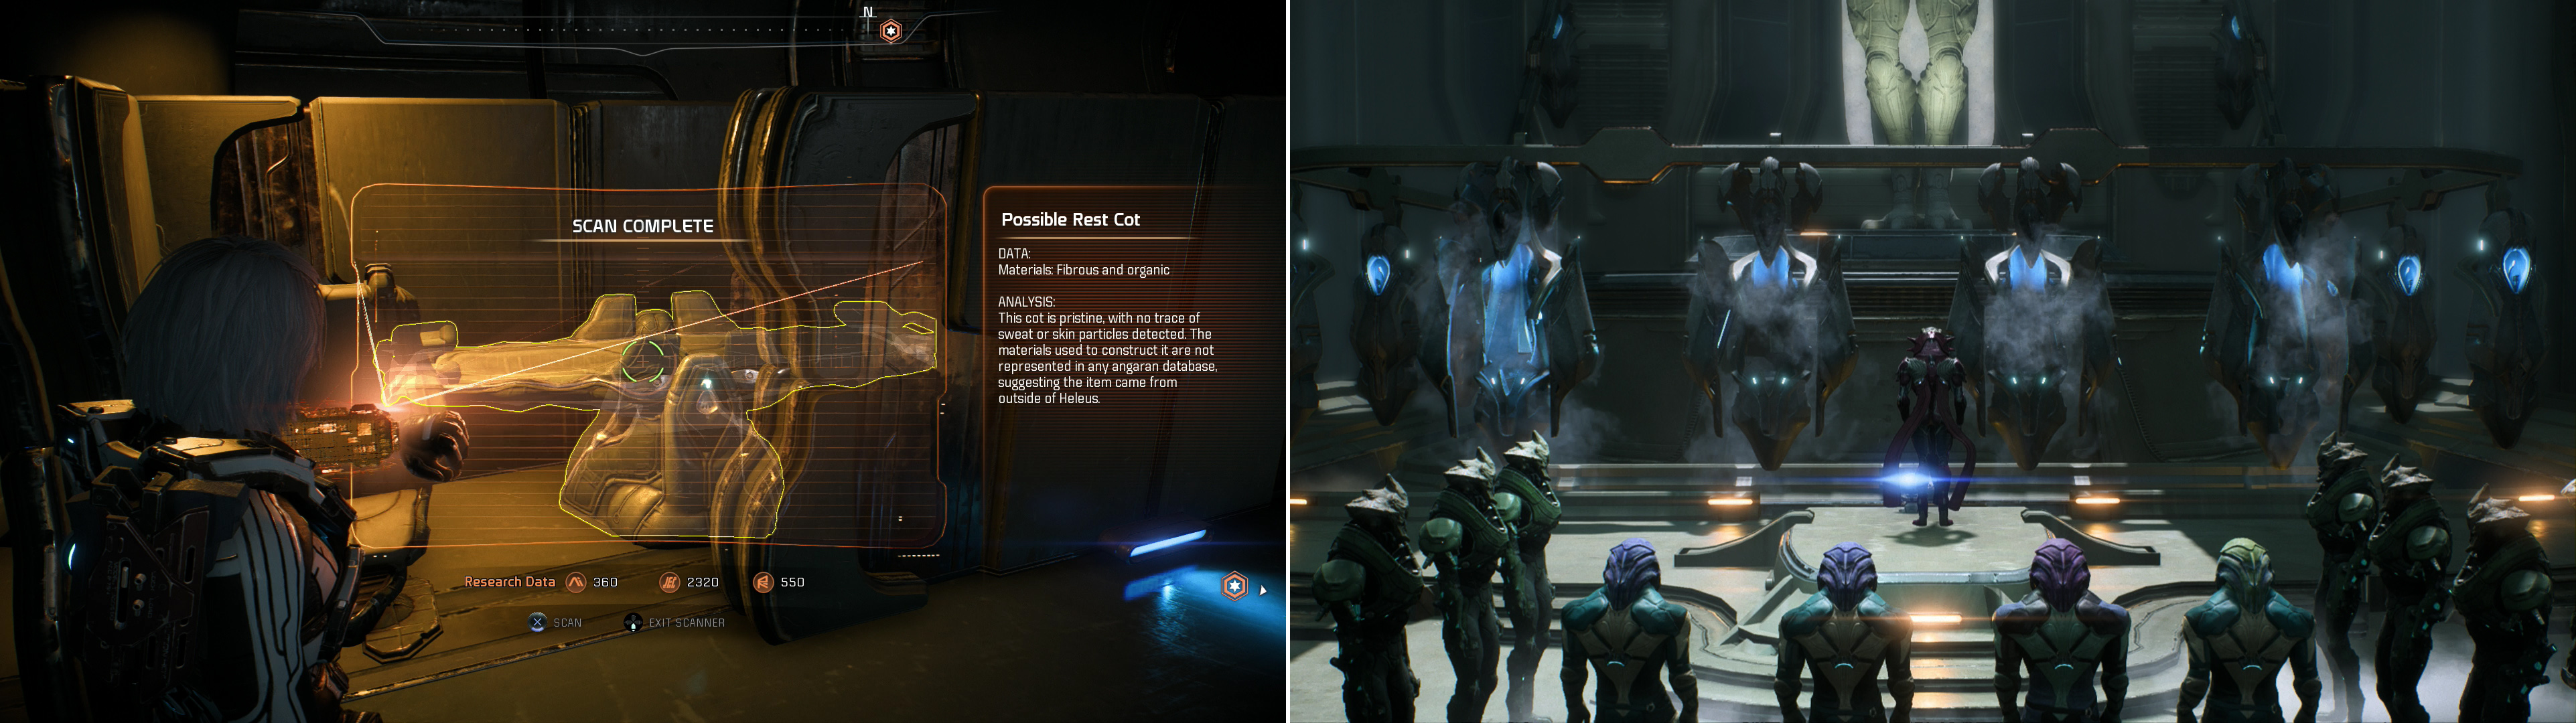 Keep your scanner handy throughout the Kett base, as there's much to learn about these aggressive aliens, and many Research Data points to earn (left). Witness an odd interaction between what appears to be a Kett religious figure and some captive Angara (right), which foreshadows revelations to come.